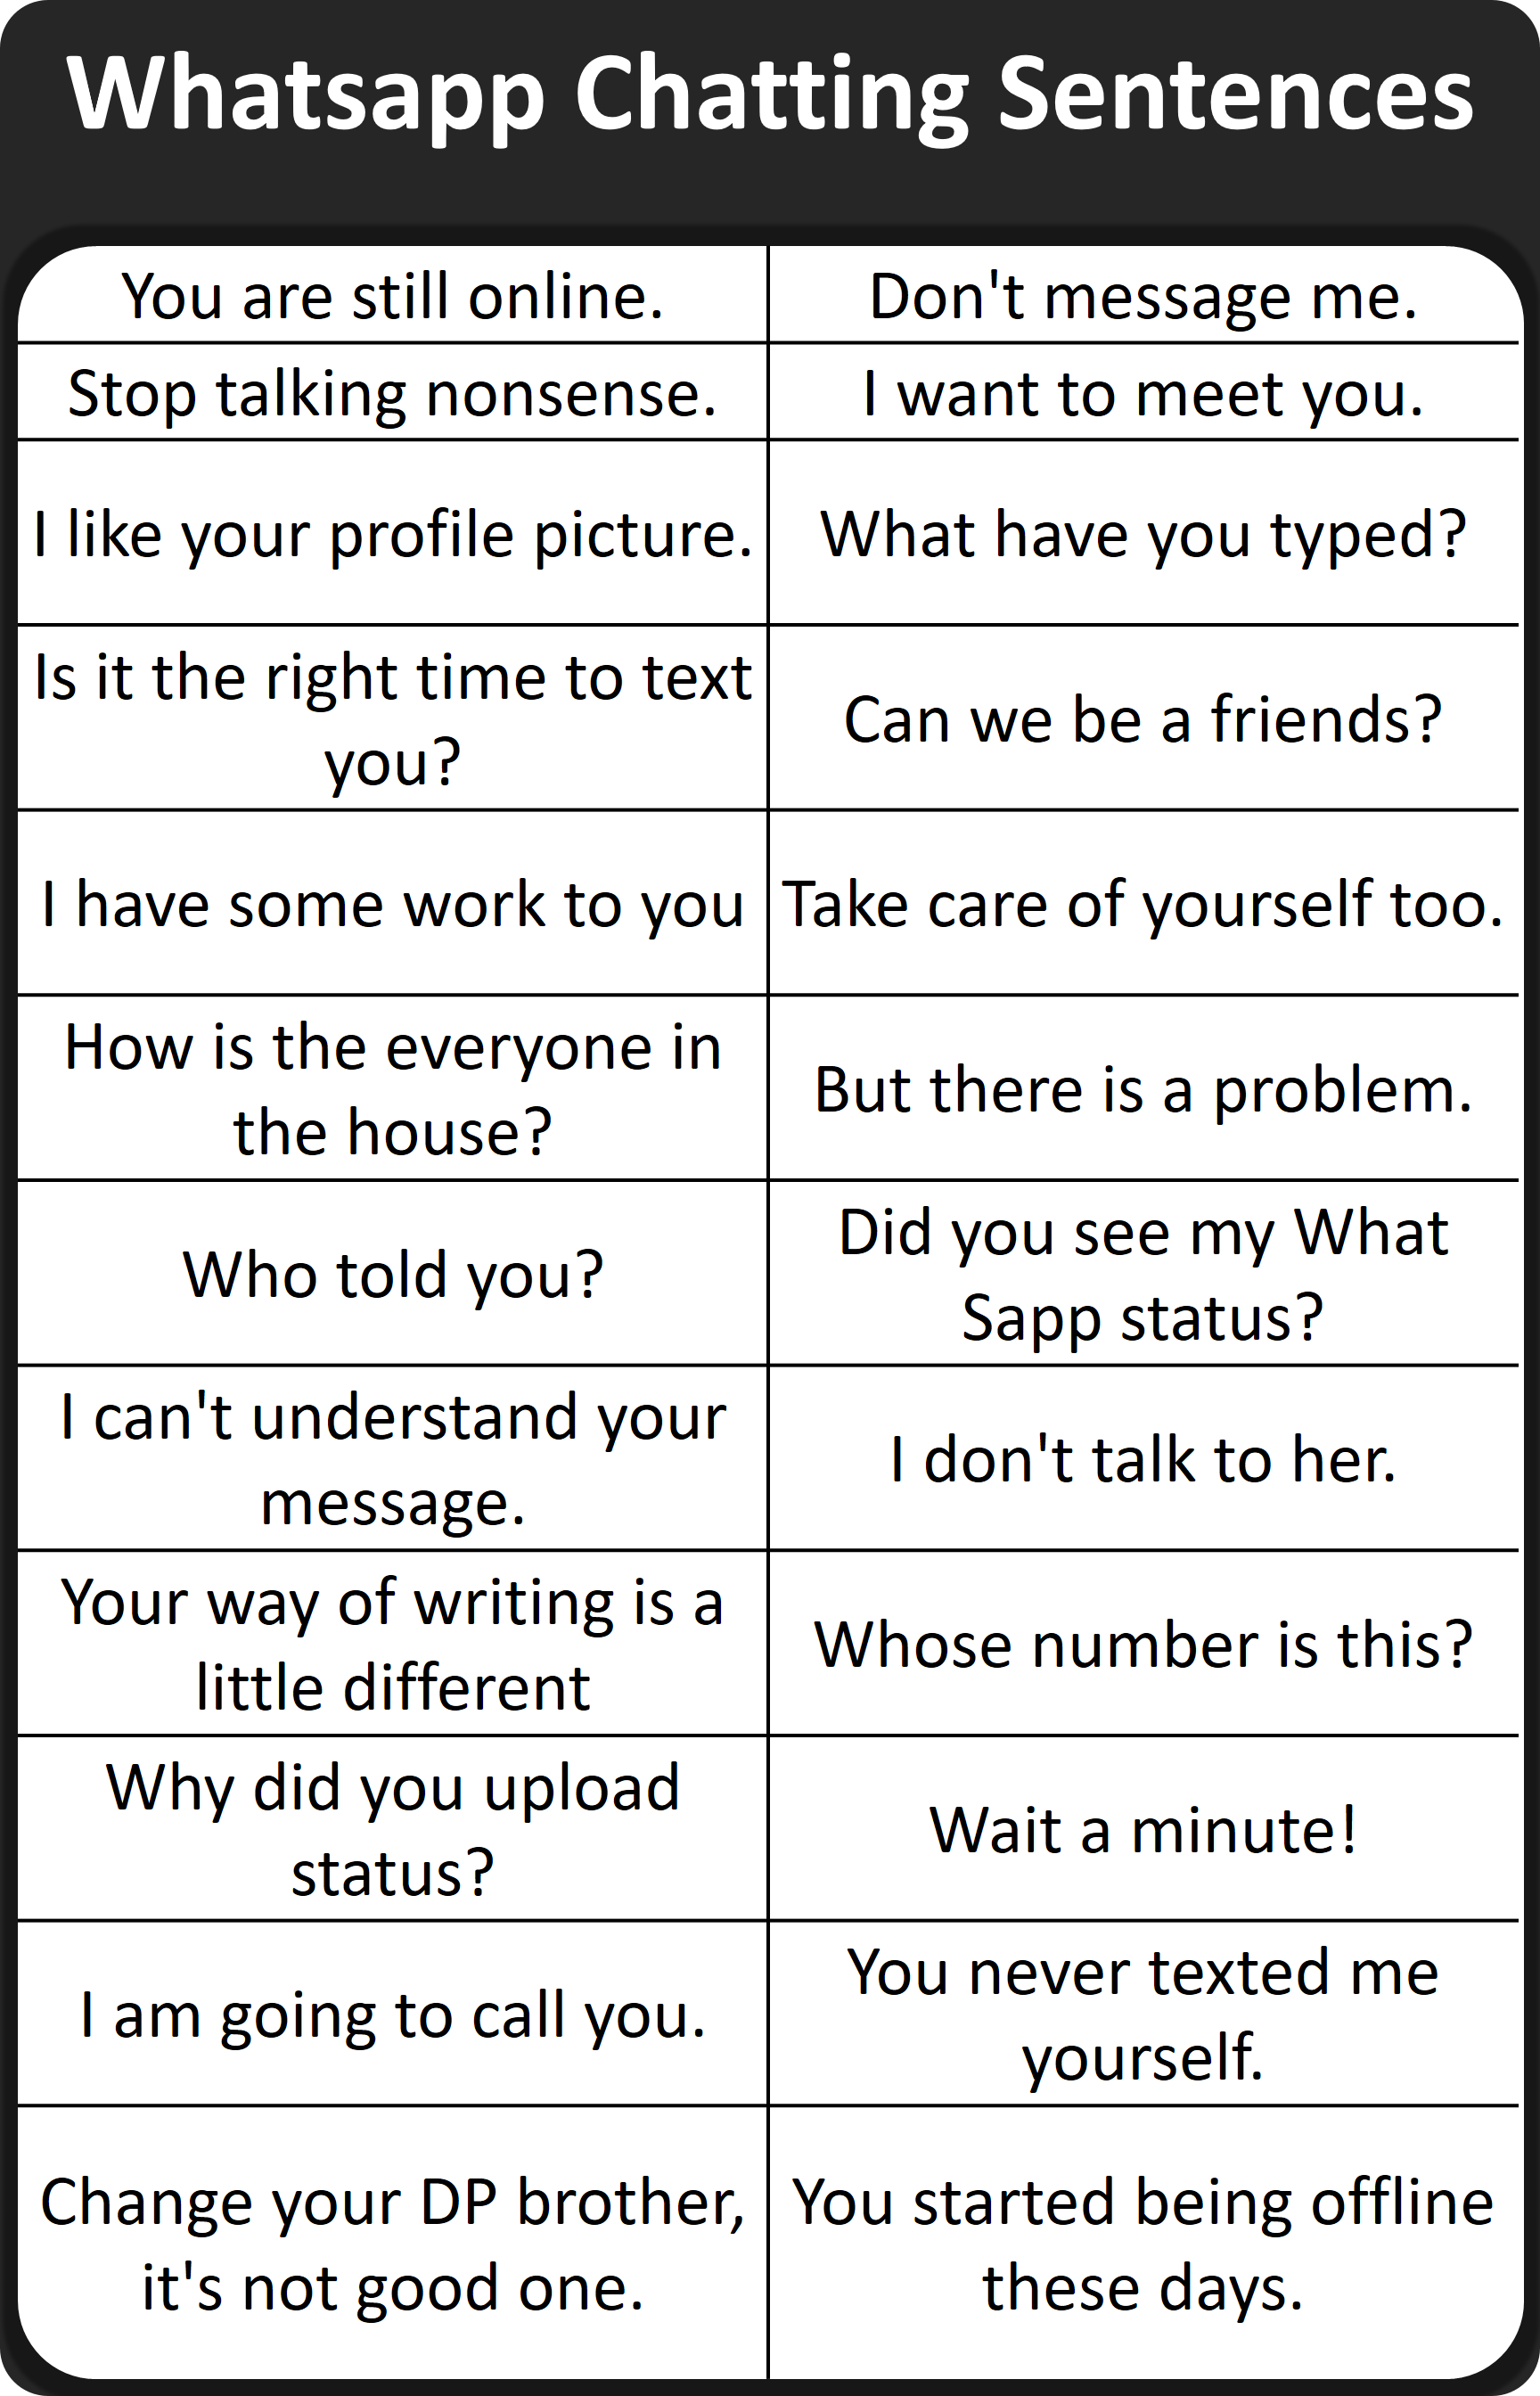 Daily use English Sentences for chatting on WhatsApp